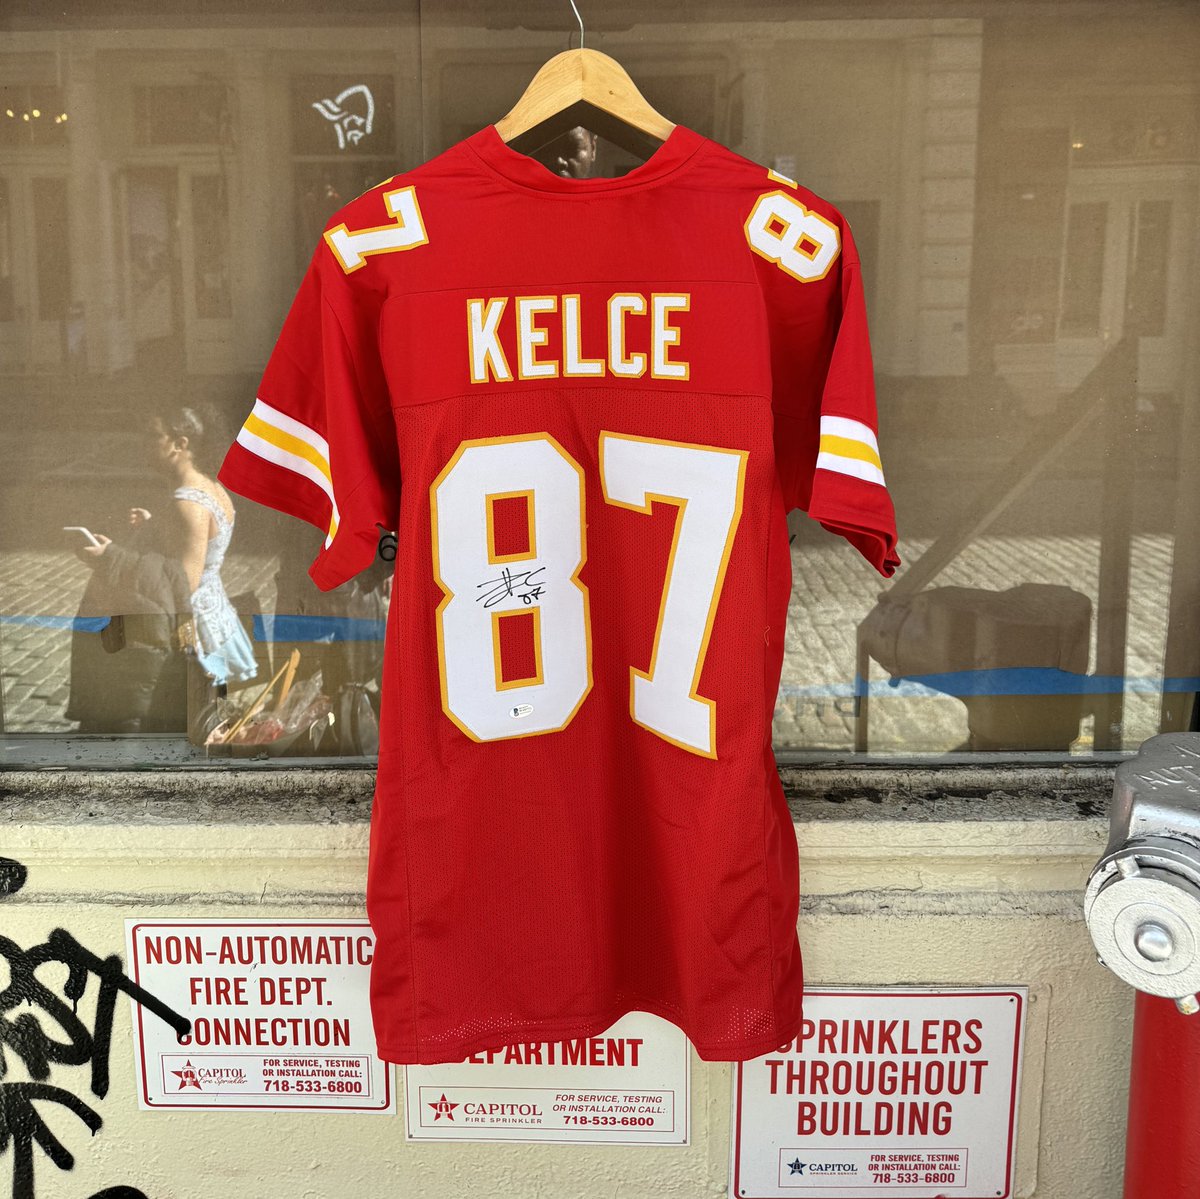 🏈🔥 Another custom @tkelce jersey for sale. Offseason is the sweet spot for finding deals!

Auth: @beckettcollect WH44231
Accepted payments: crypto, Zelle, applepay
Payment plans: @Klarna @AfterpayUSA @zip_usa just add fees

$495 Shipped (+$450 framed)
#MancaveDeals #nfl #Chiefs